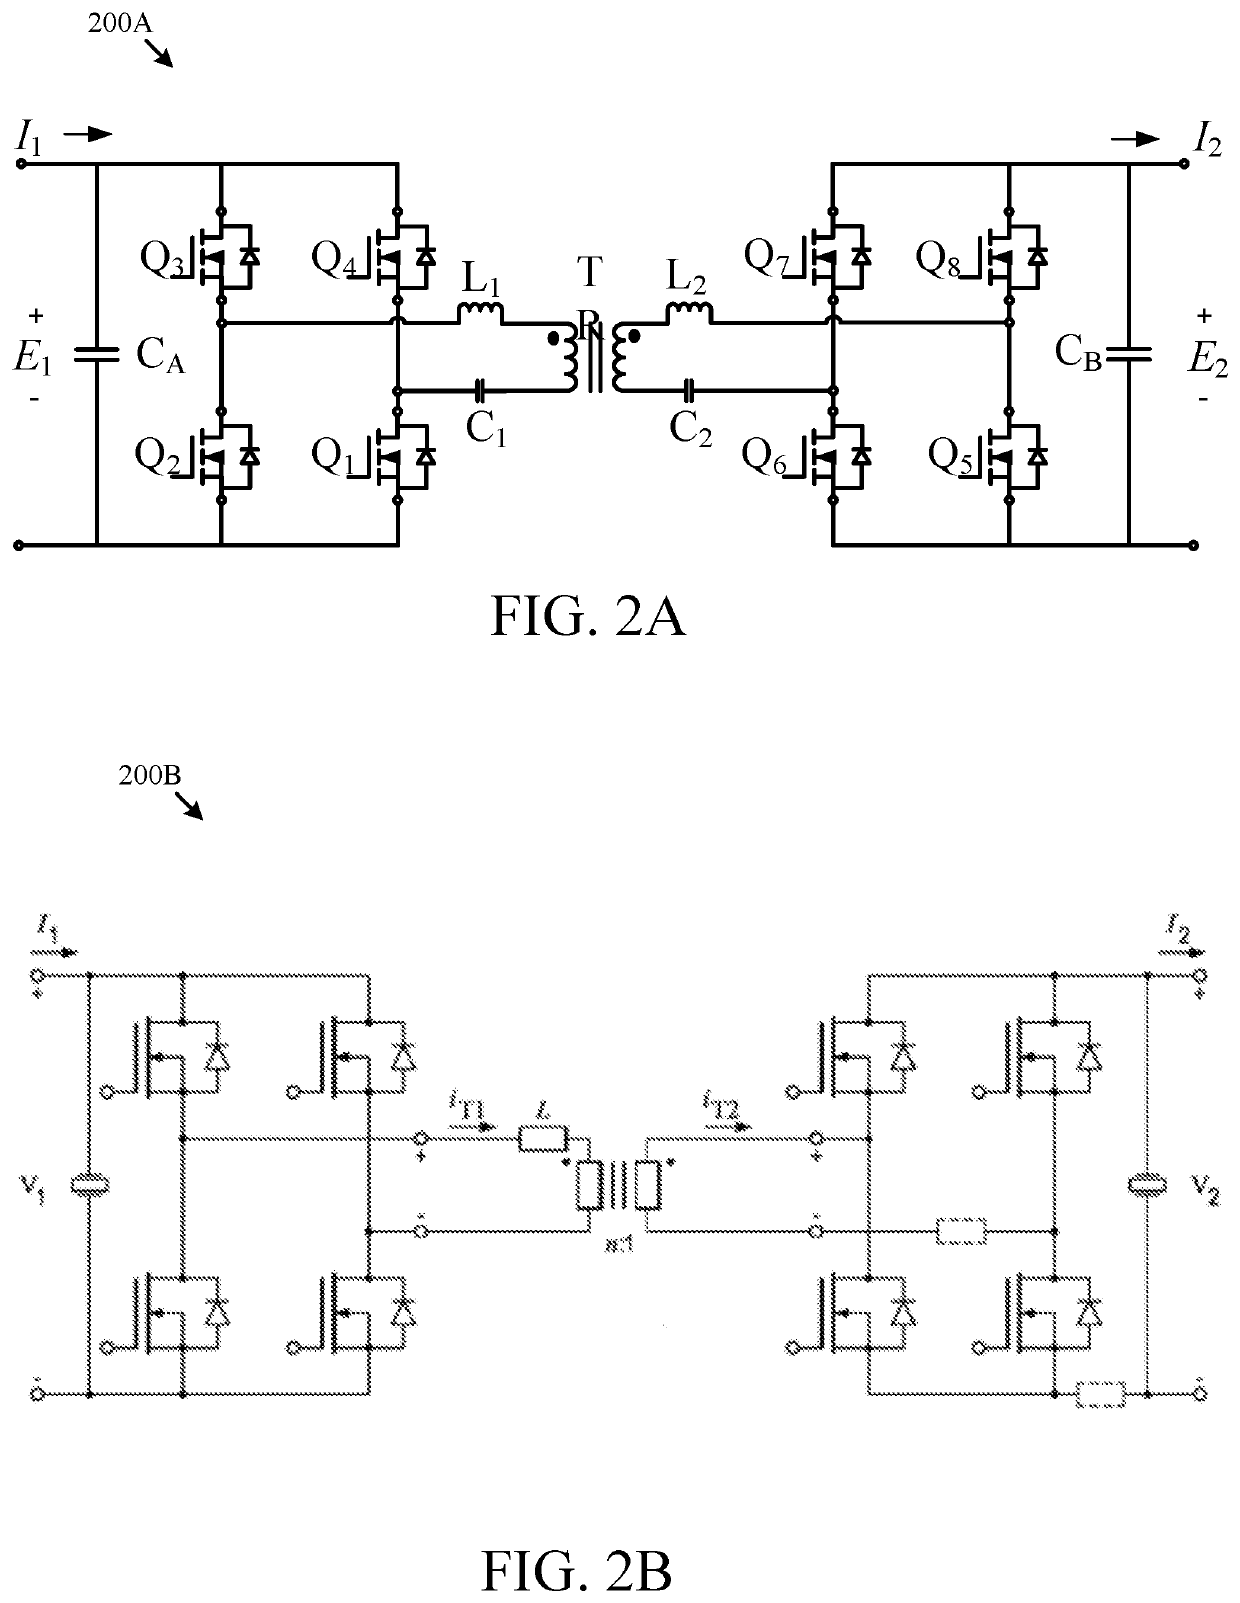 Systems and methods for electric vehicles with modular battery packs